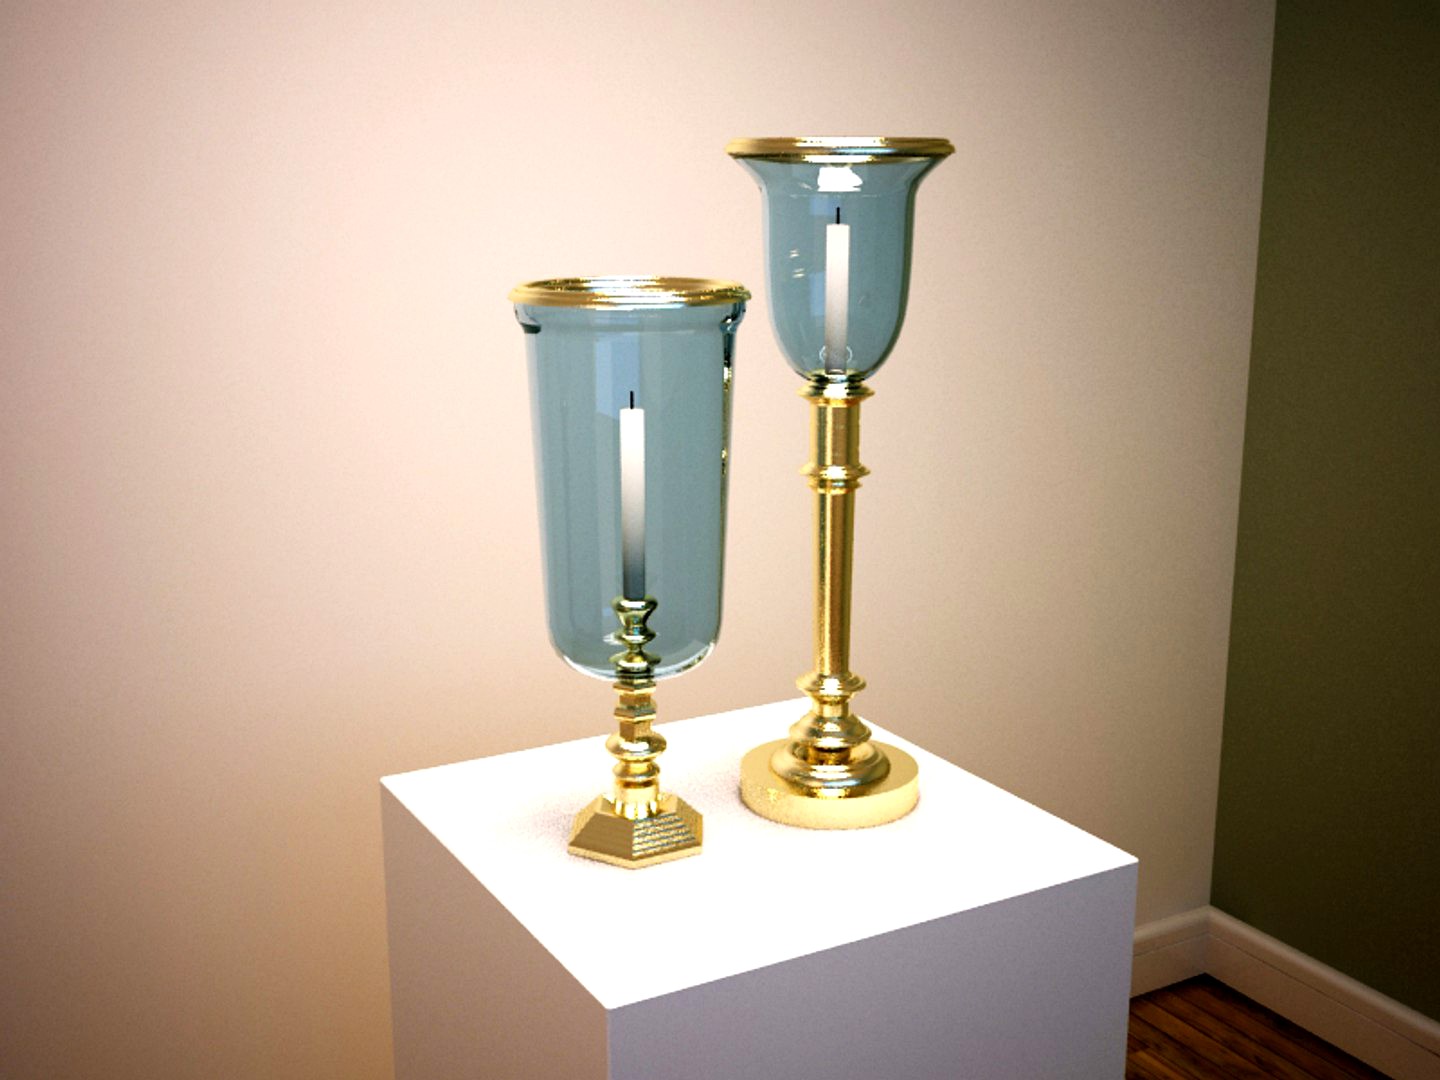 Candle lamps